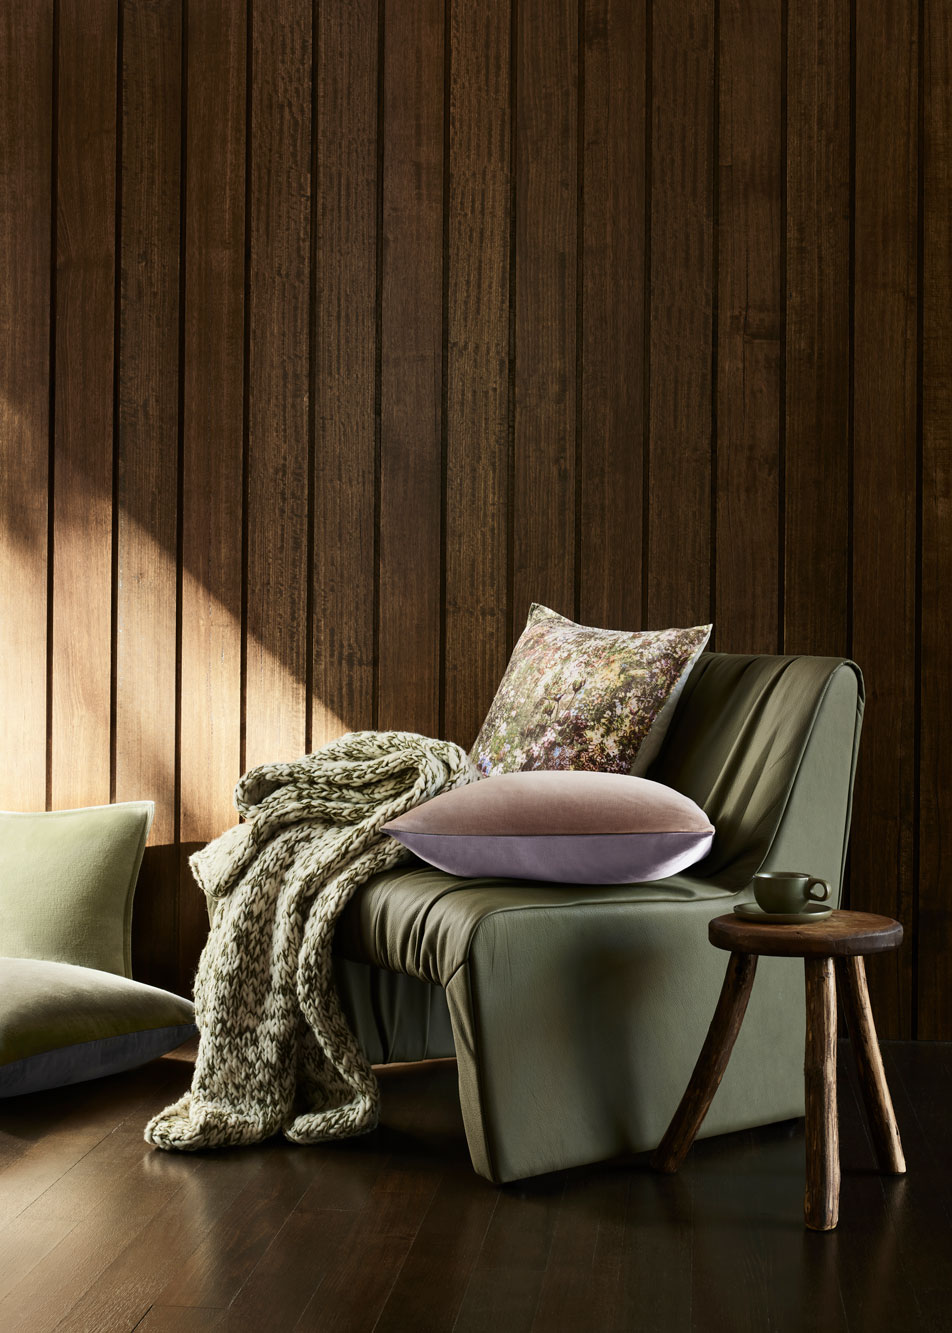 A green leather armchair in front of a timber wall. On top of the chair is two cushions and a knit throw.